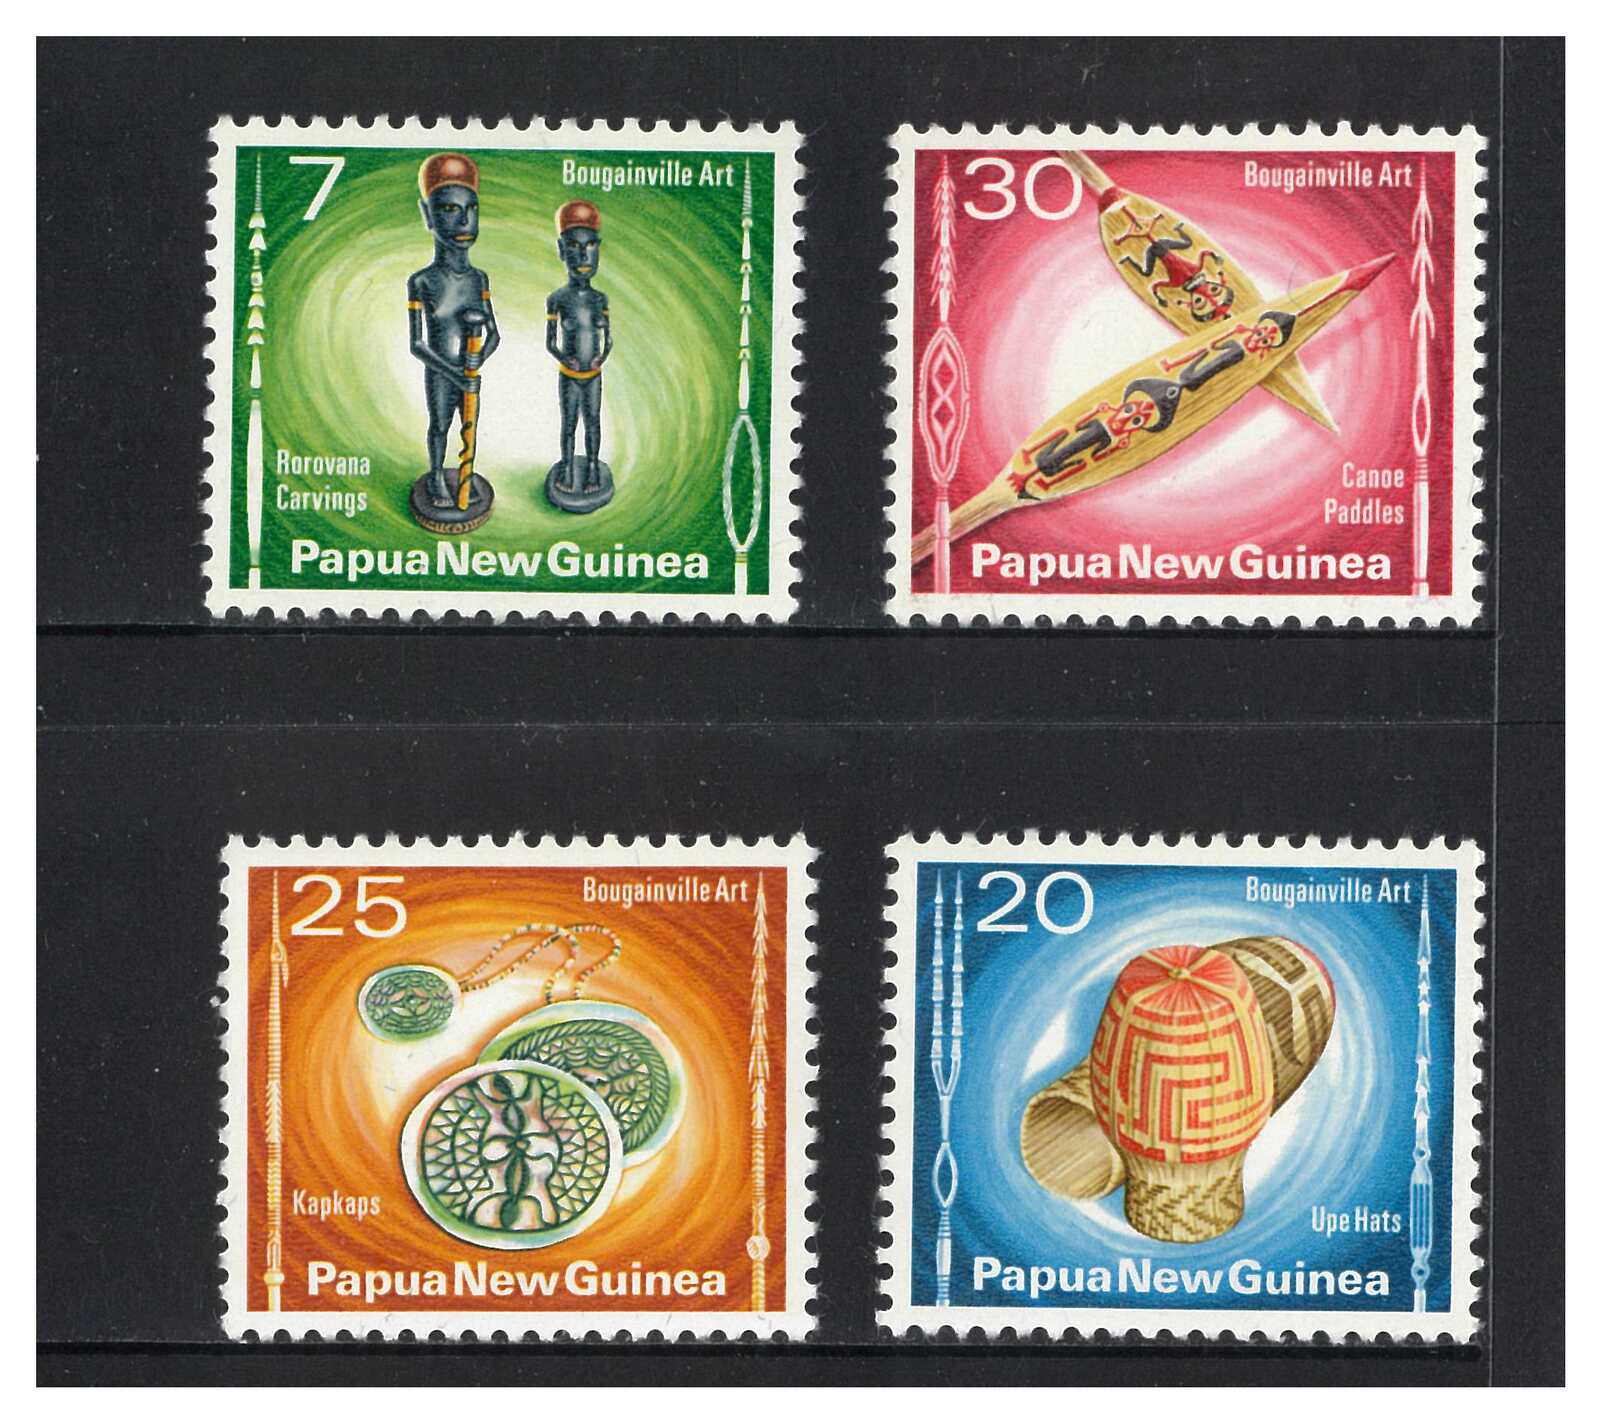 Papua New Guinea 1976 Bougainville Art Set of 4 Stamps MUH SG301/04